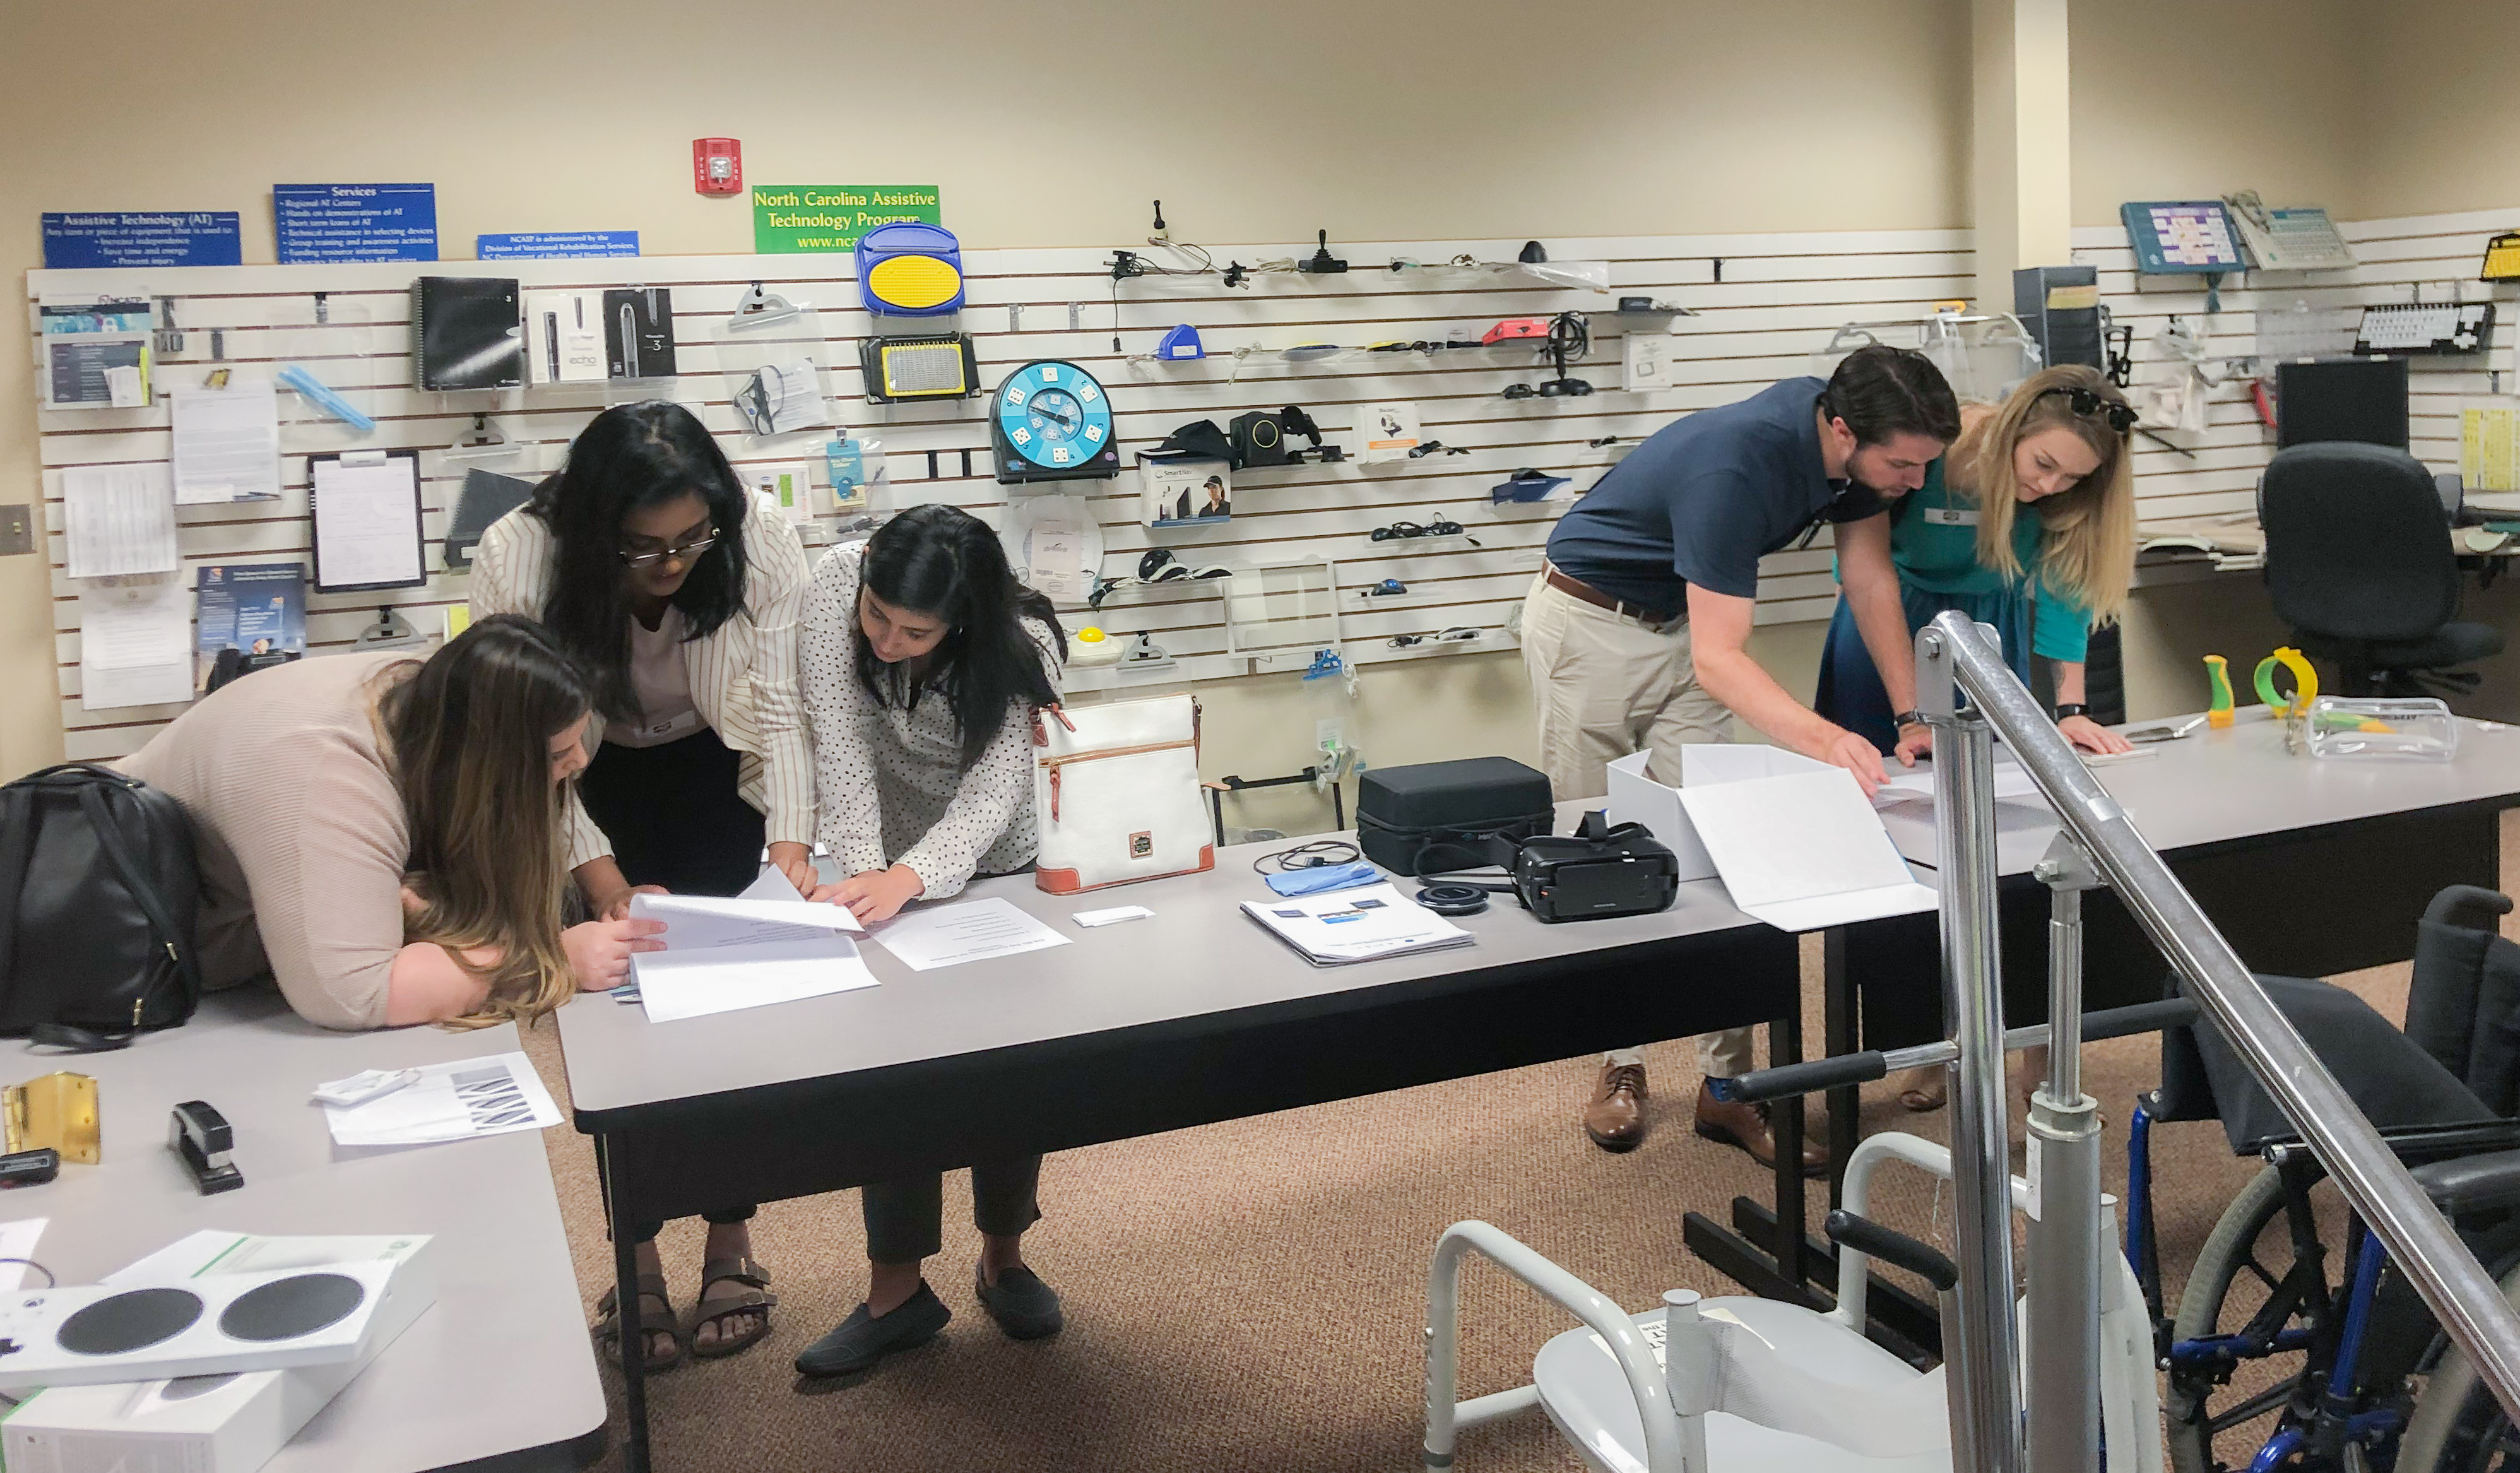 A group of RSA scholars work with assistive technology on their tour of vocational rehabilitation and community rehabilitation offices.